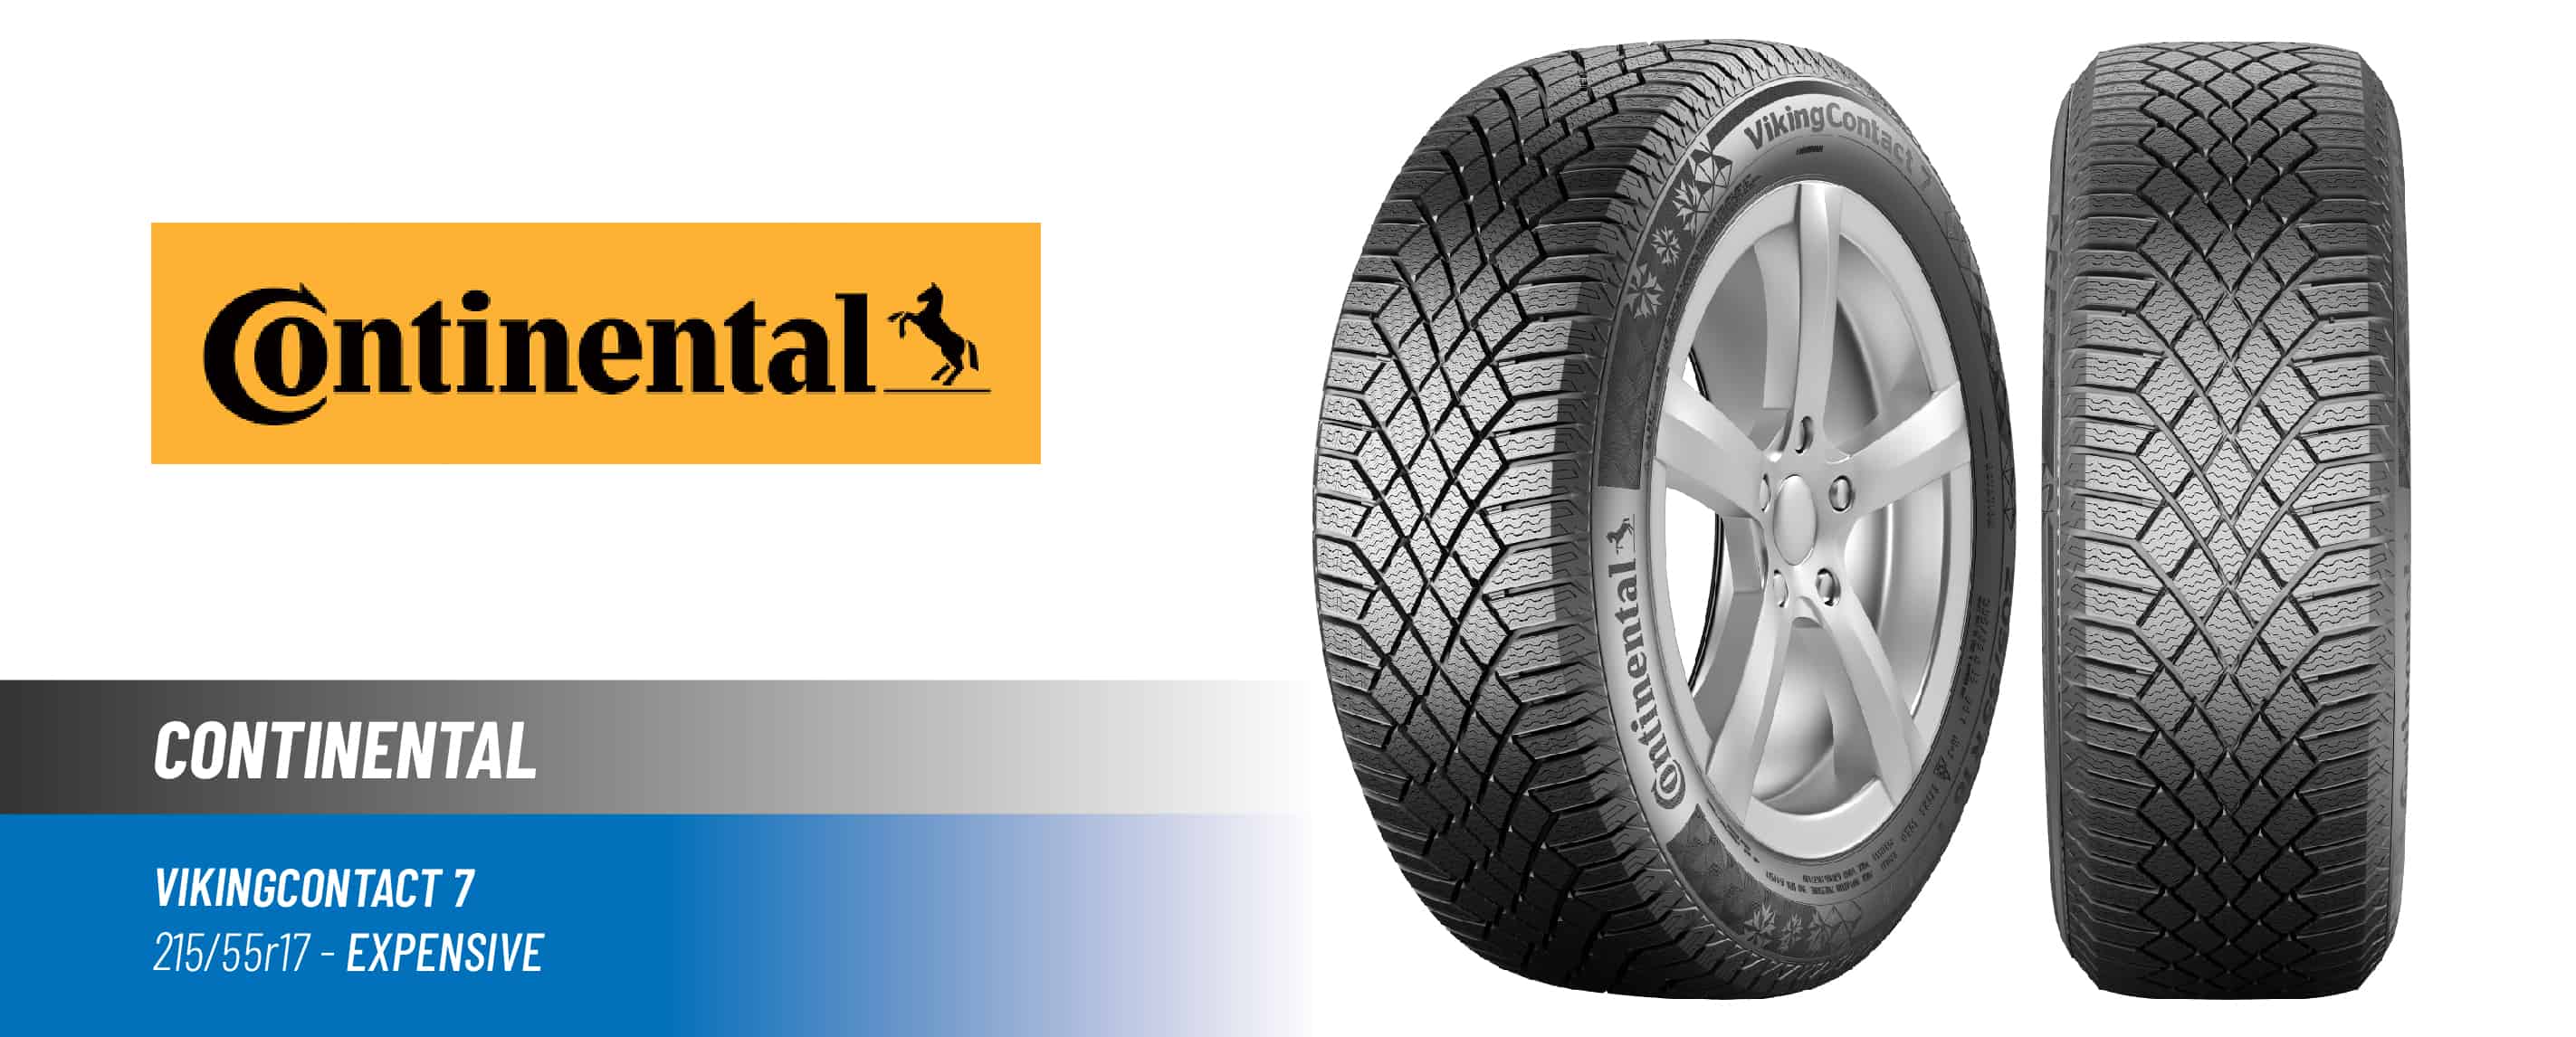 Top#5 High Price: Continental VikingContact 7 – best 215/55 r17